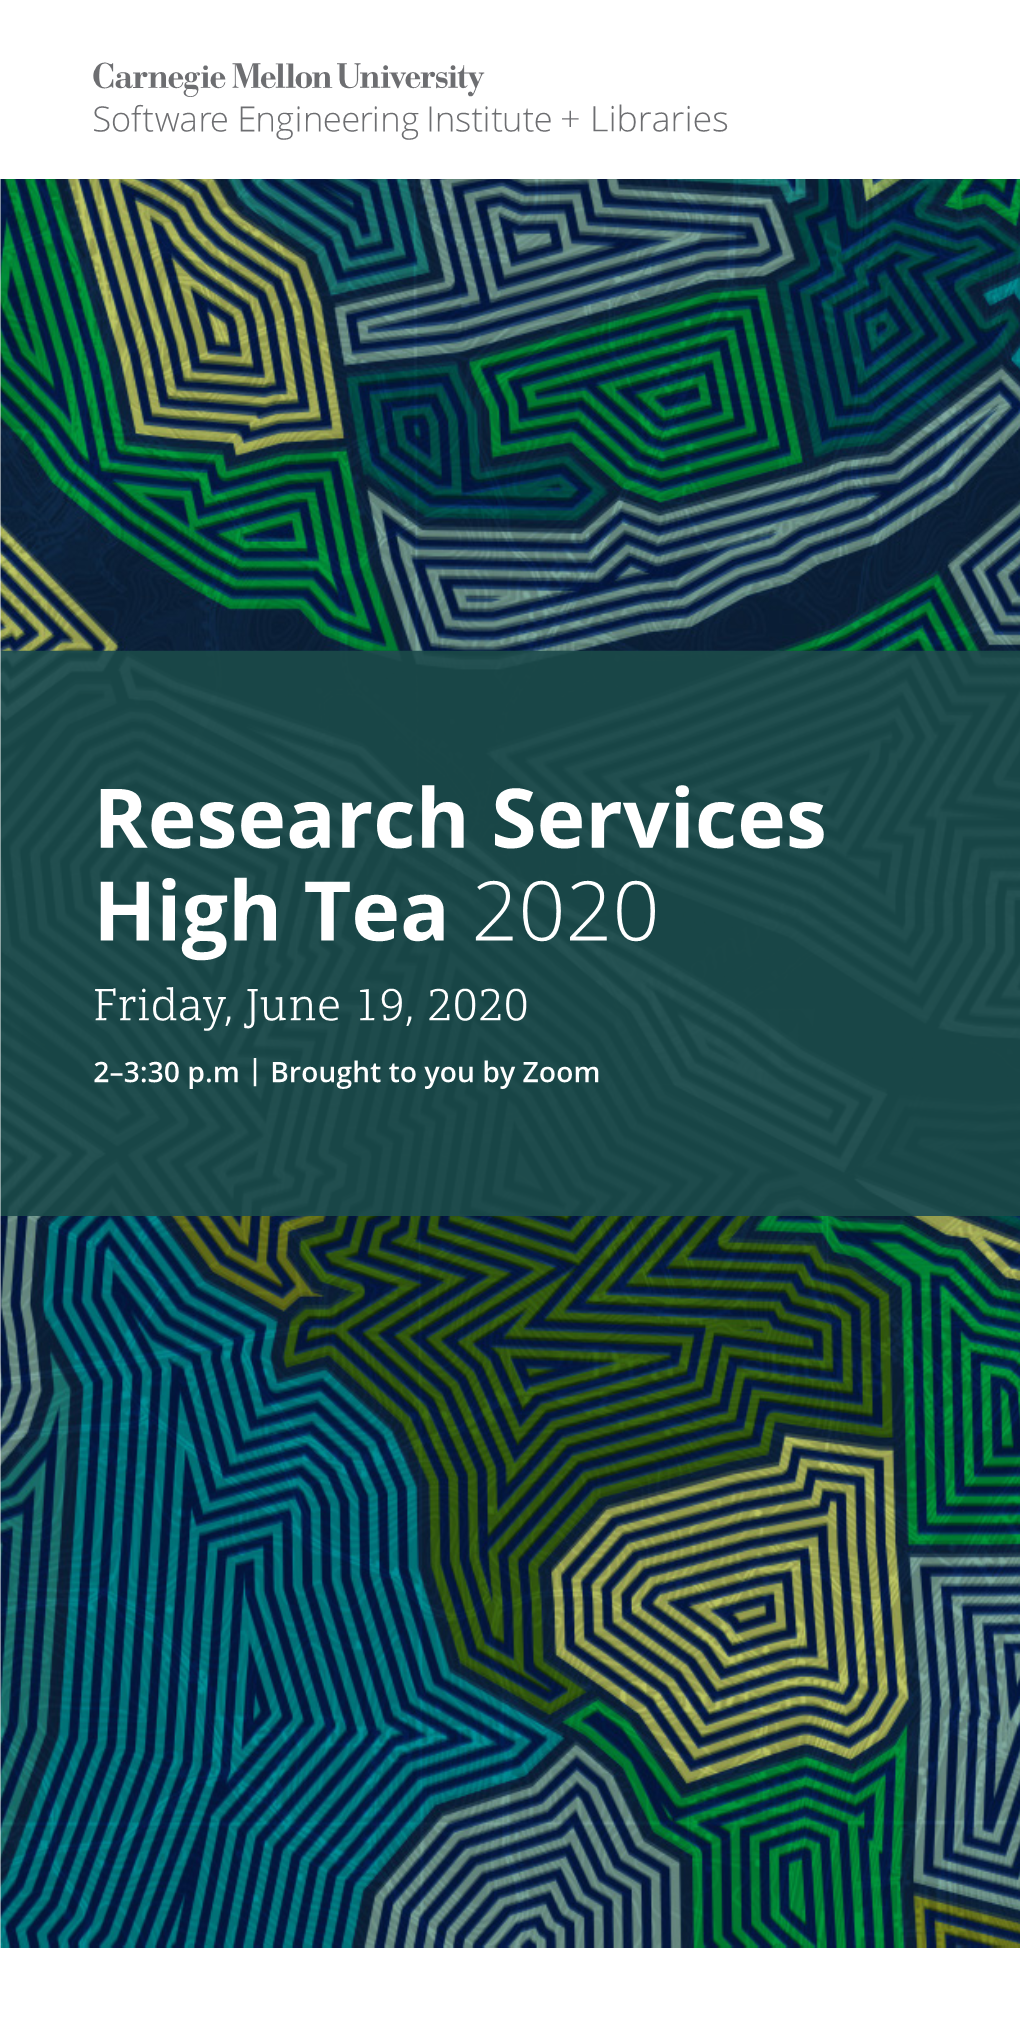 Research Services High Tea 2020 Friday, June 19, 2020